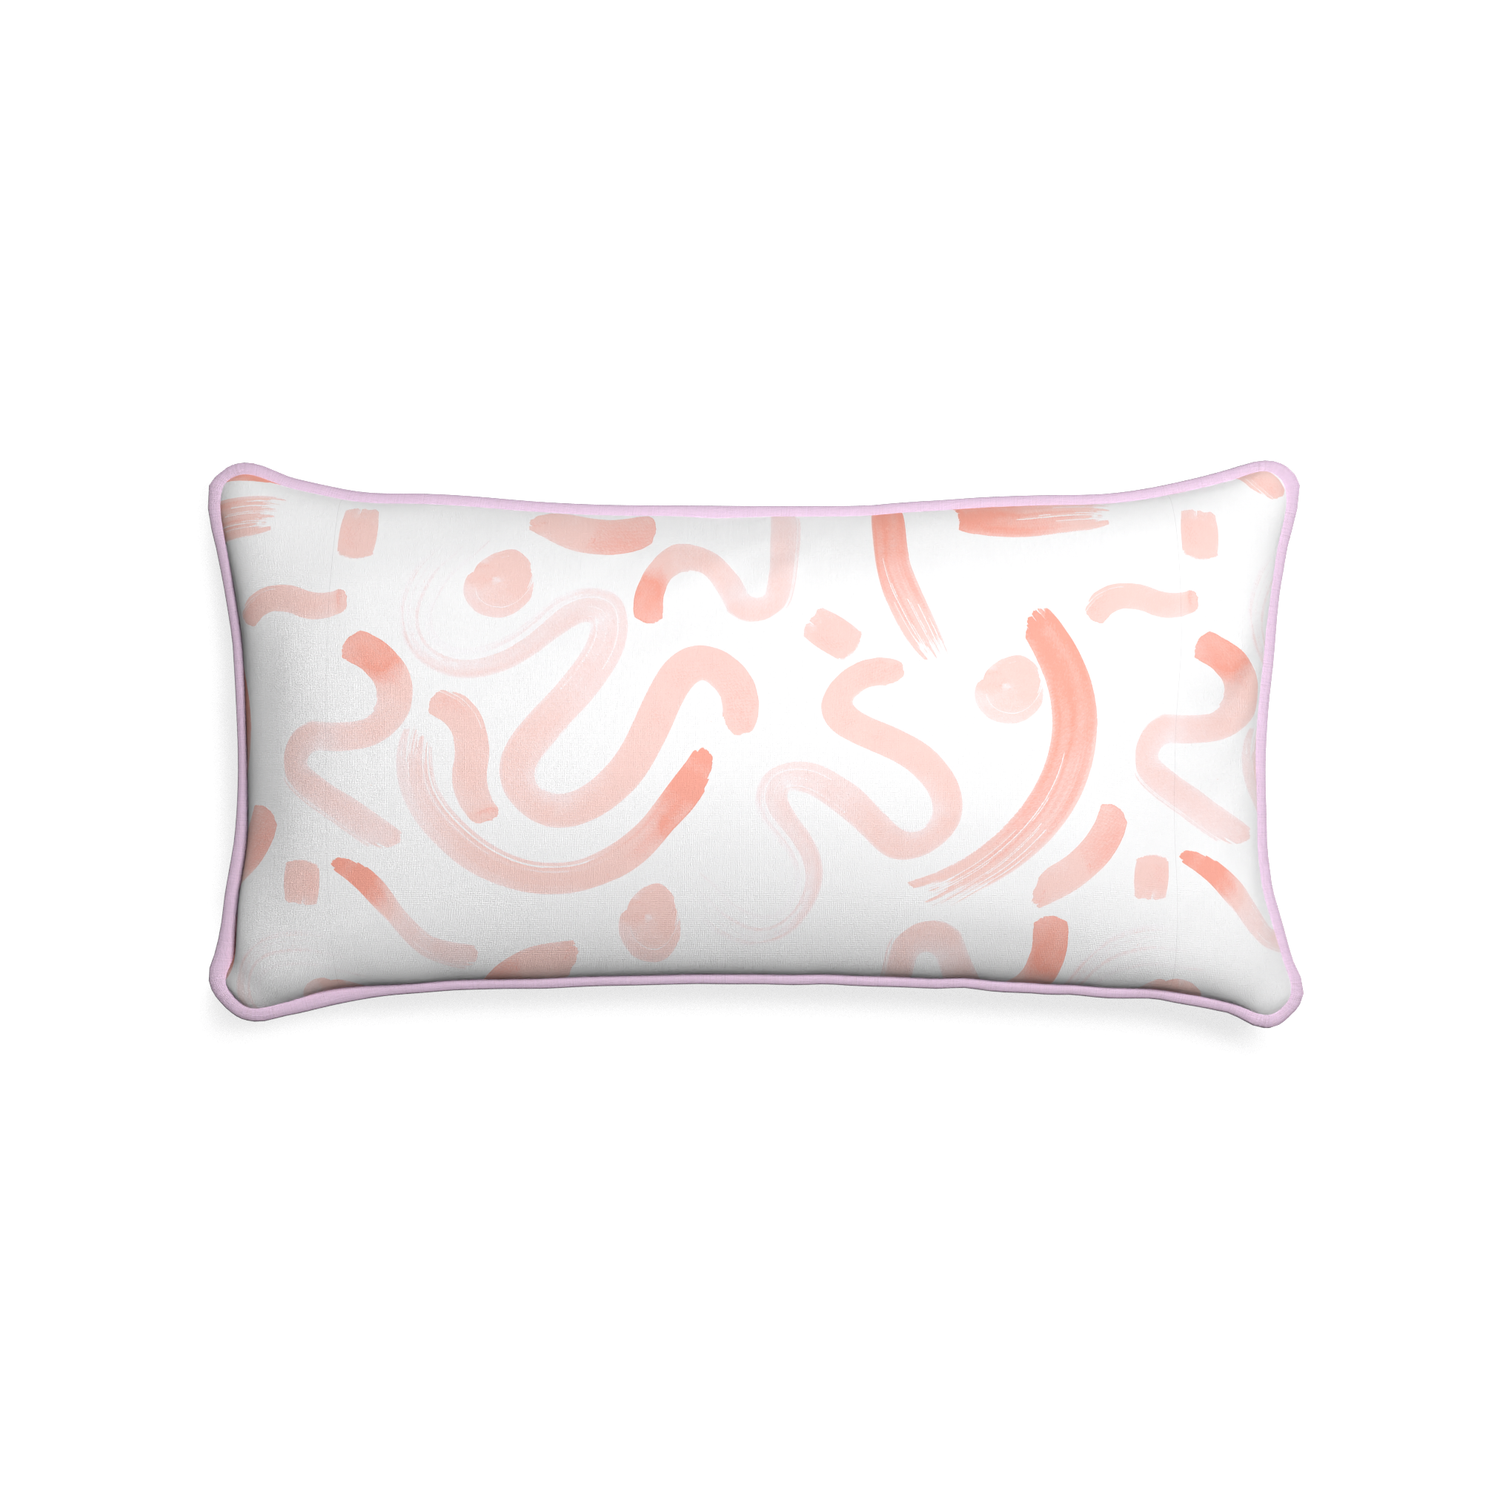 Midi-lumbar hockney pink custom pink graphicpillow with l piping on white background